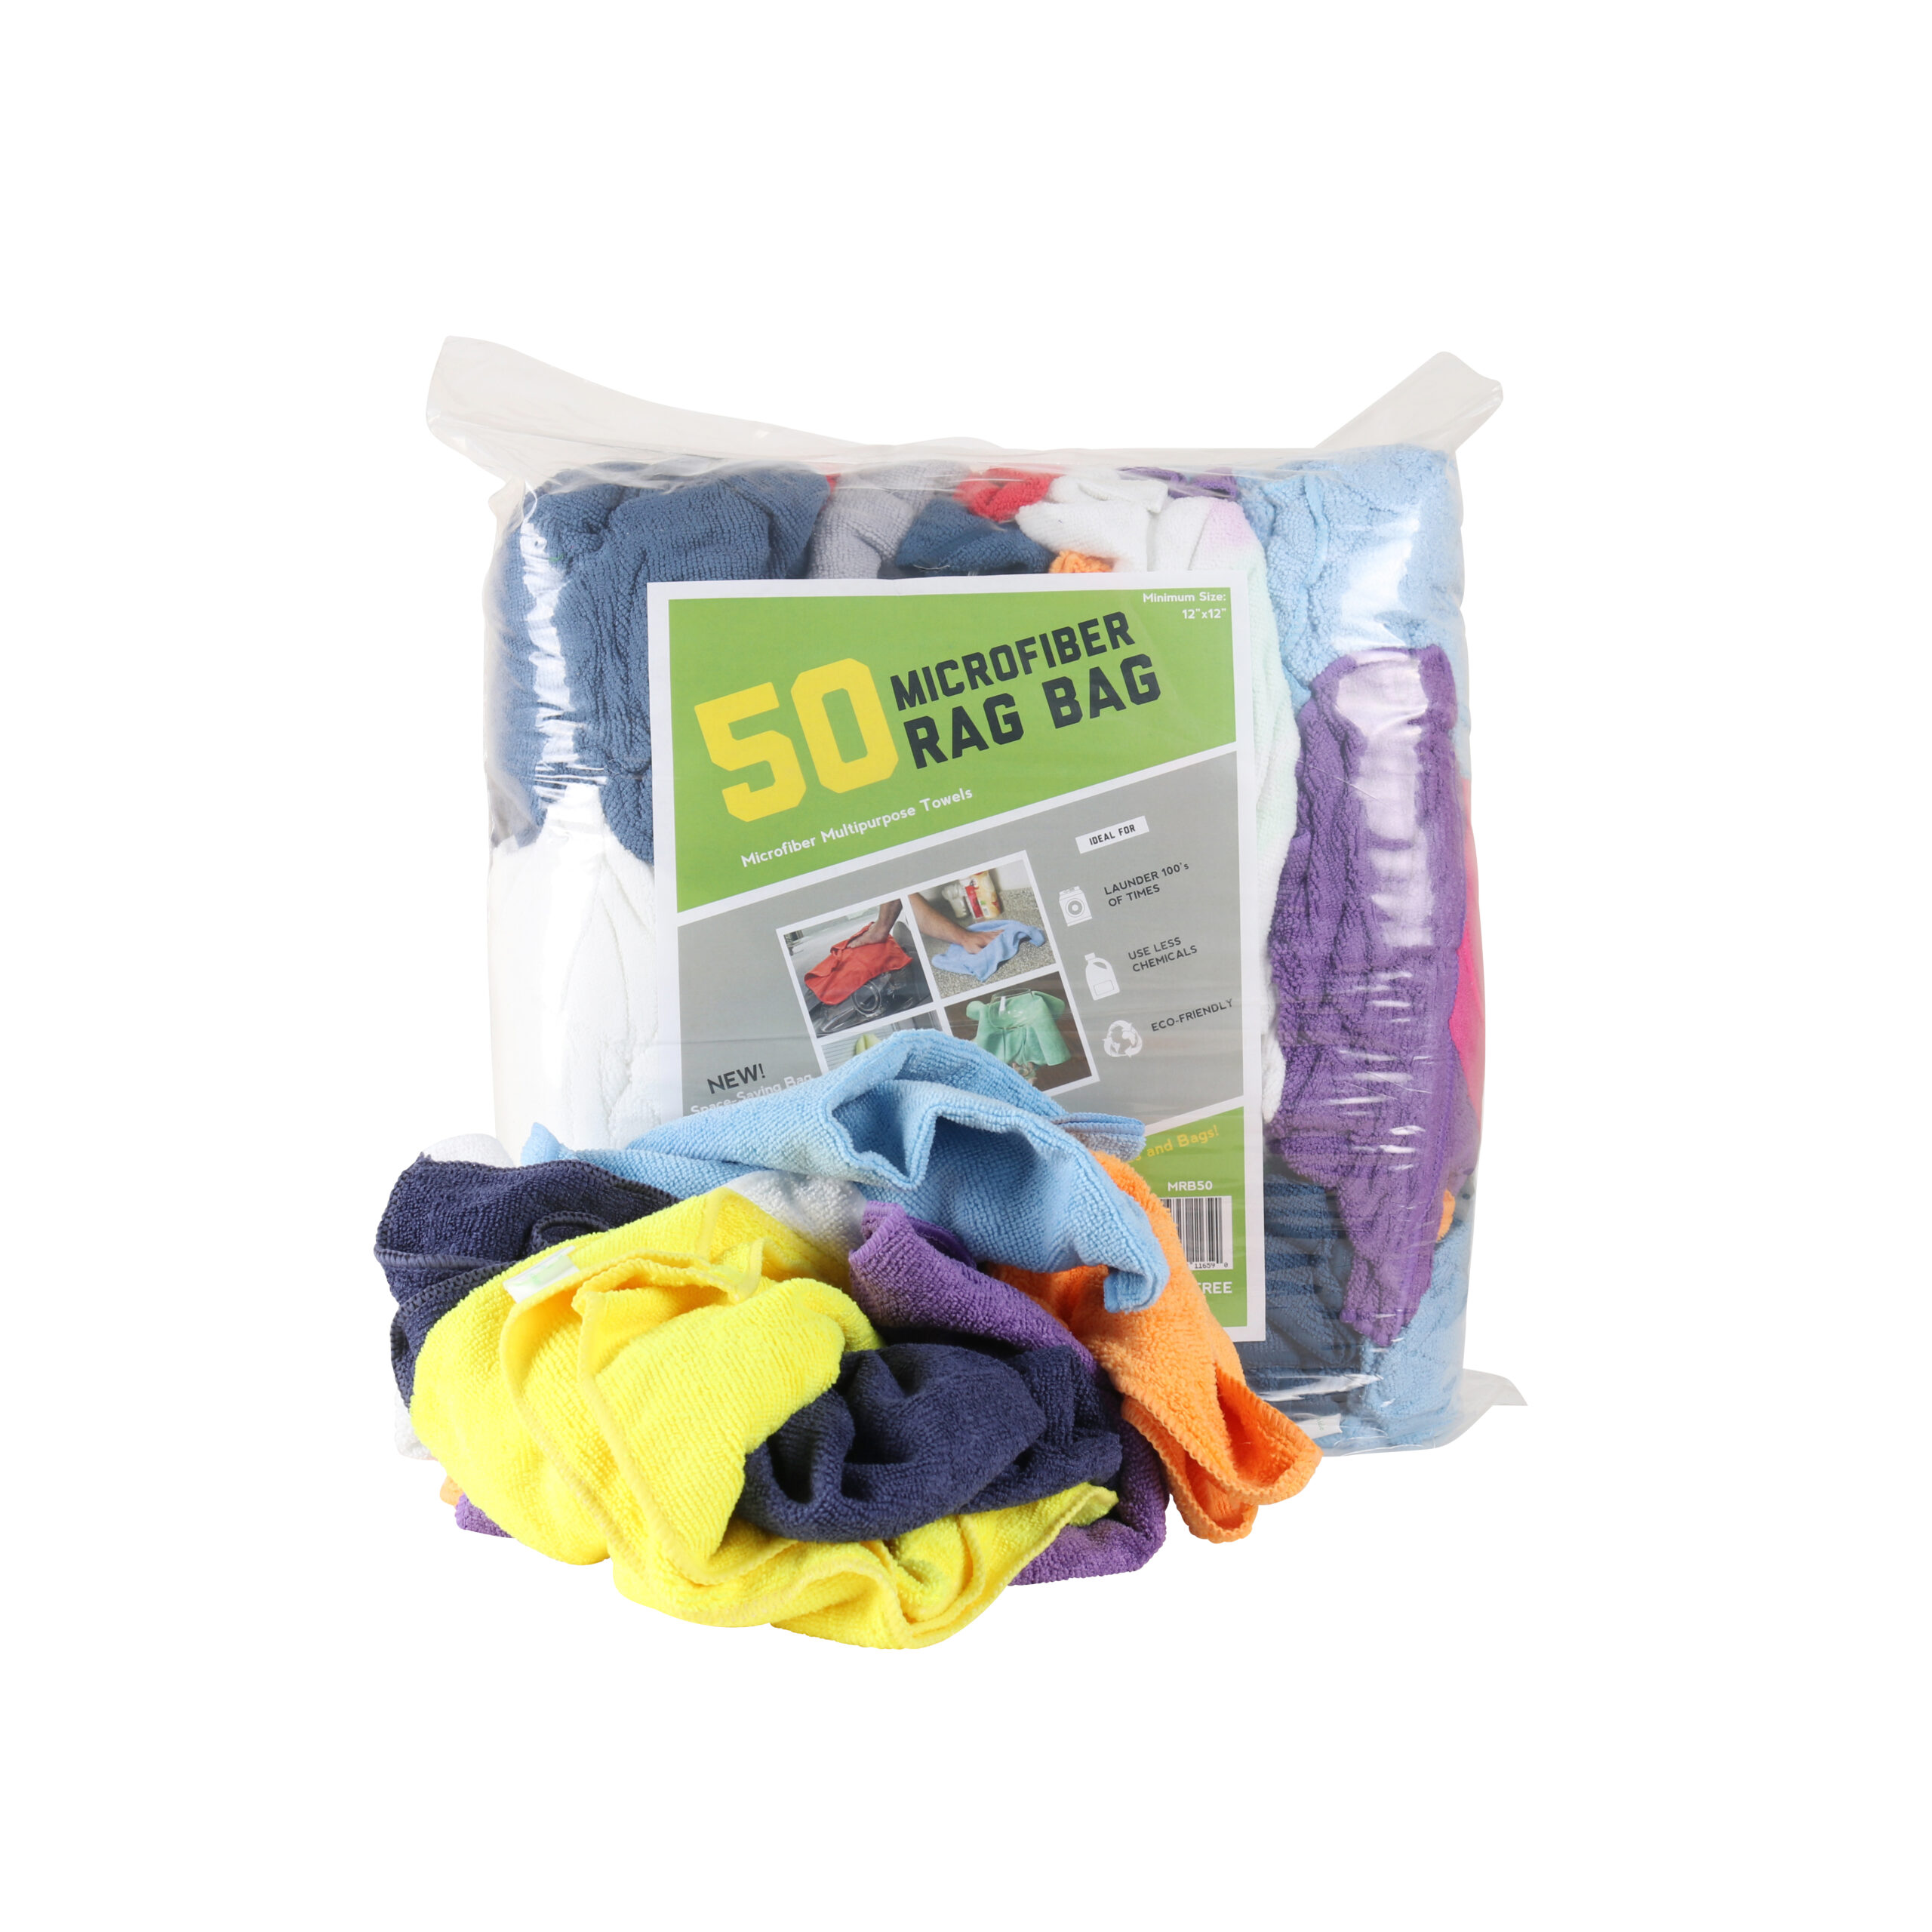 Terry Cloth Wash Rags - 12 x 12 - Blue - Cleaning Rags - 30 Cases